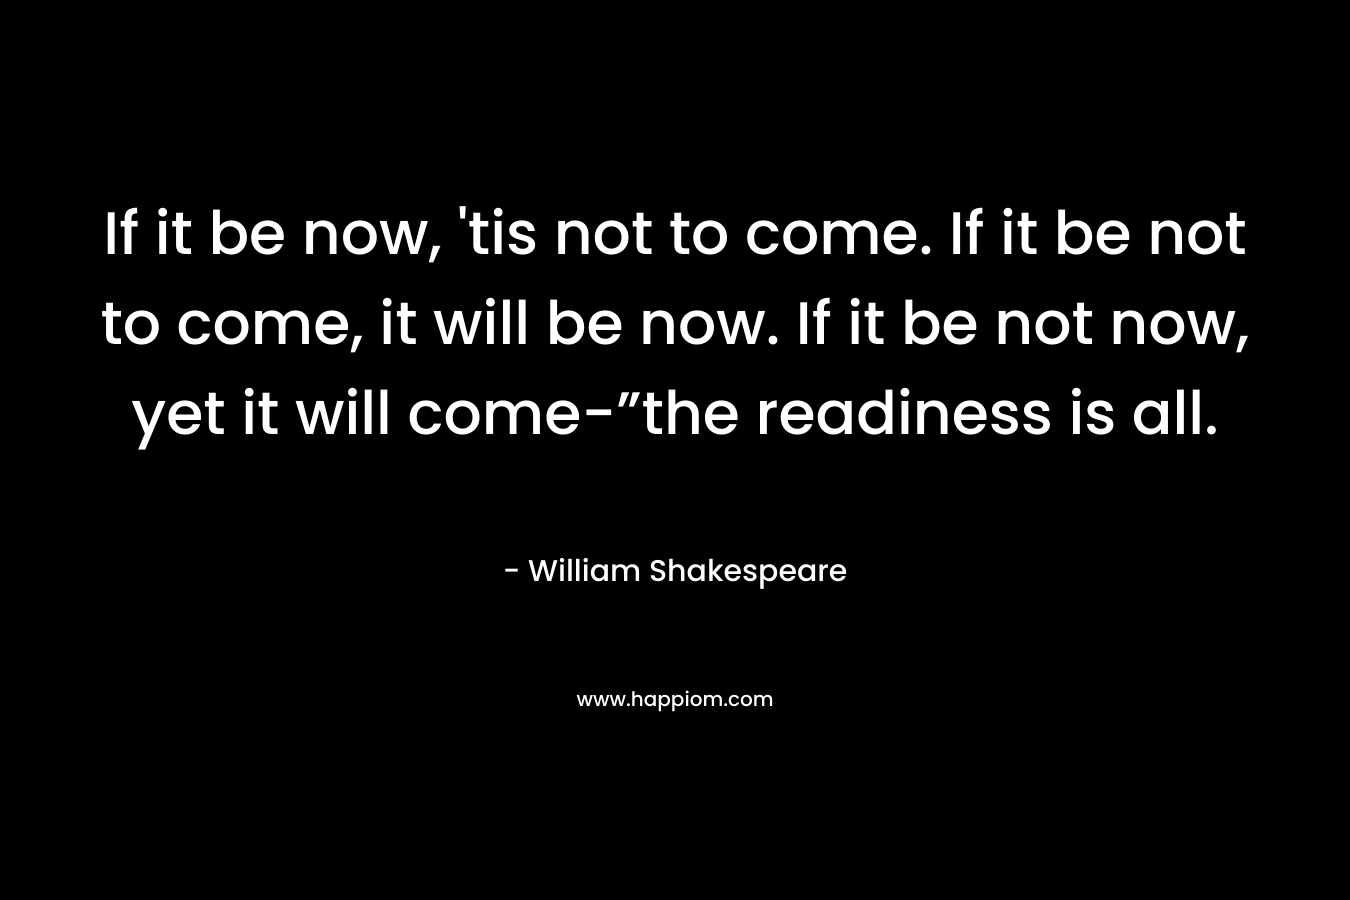 If it be now, 'tis not to come. If it be not to come, it will be now. If it be not now, yet it will come-”the readiness is all.